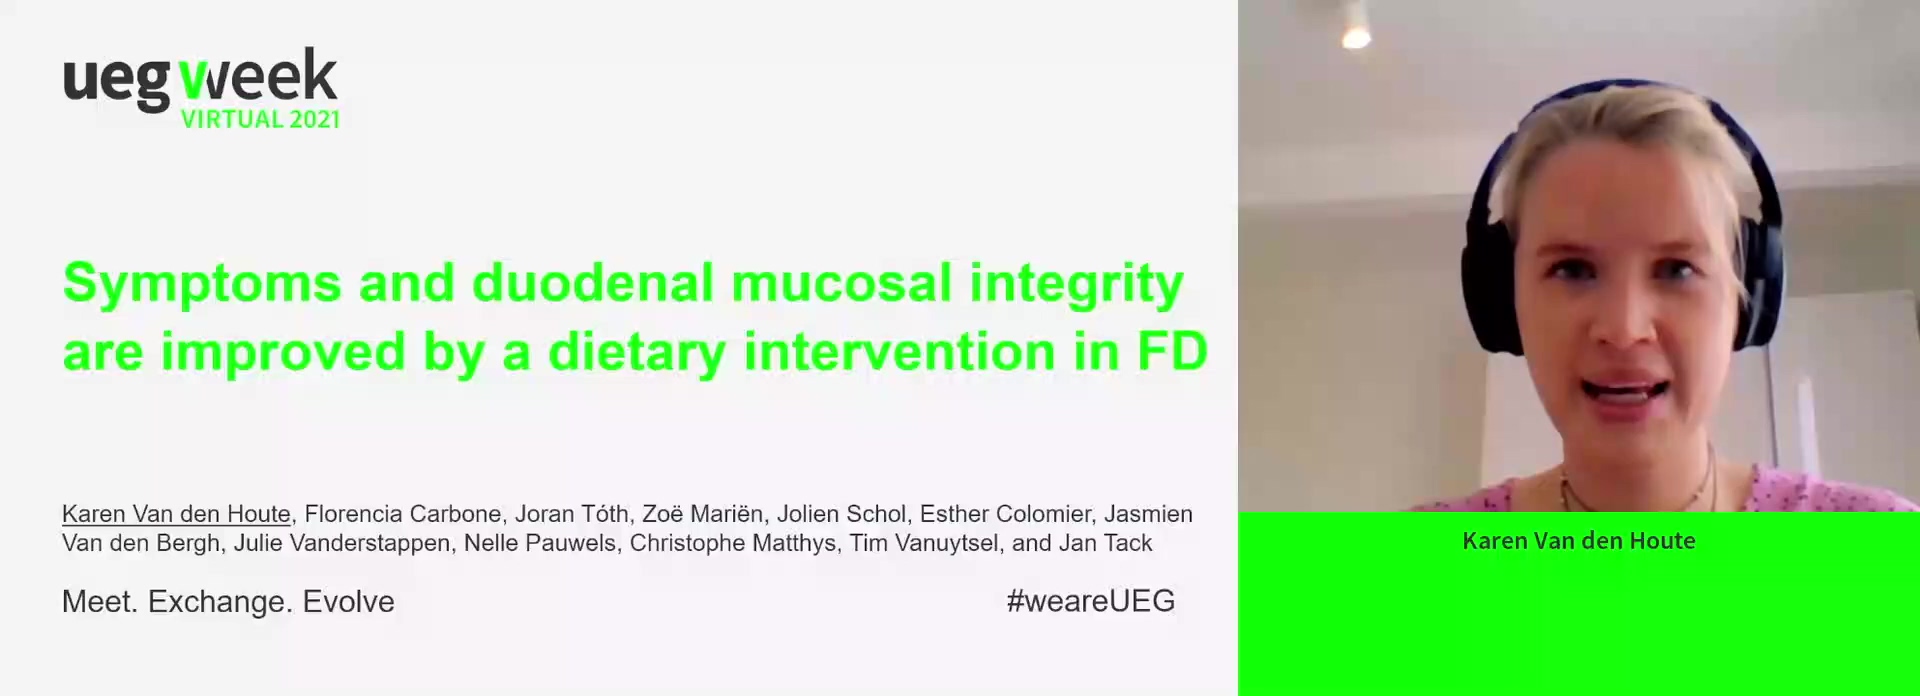 SYMPTOMS AND DUODENAL MUCOSAL INTEGRITY ARE IMPROVED BY A DIETARY INTERVENTION IN FUNCTIONAL DYSPEPSIA